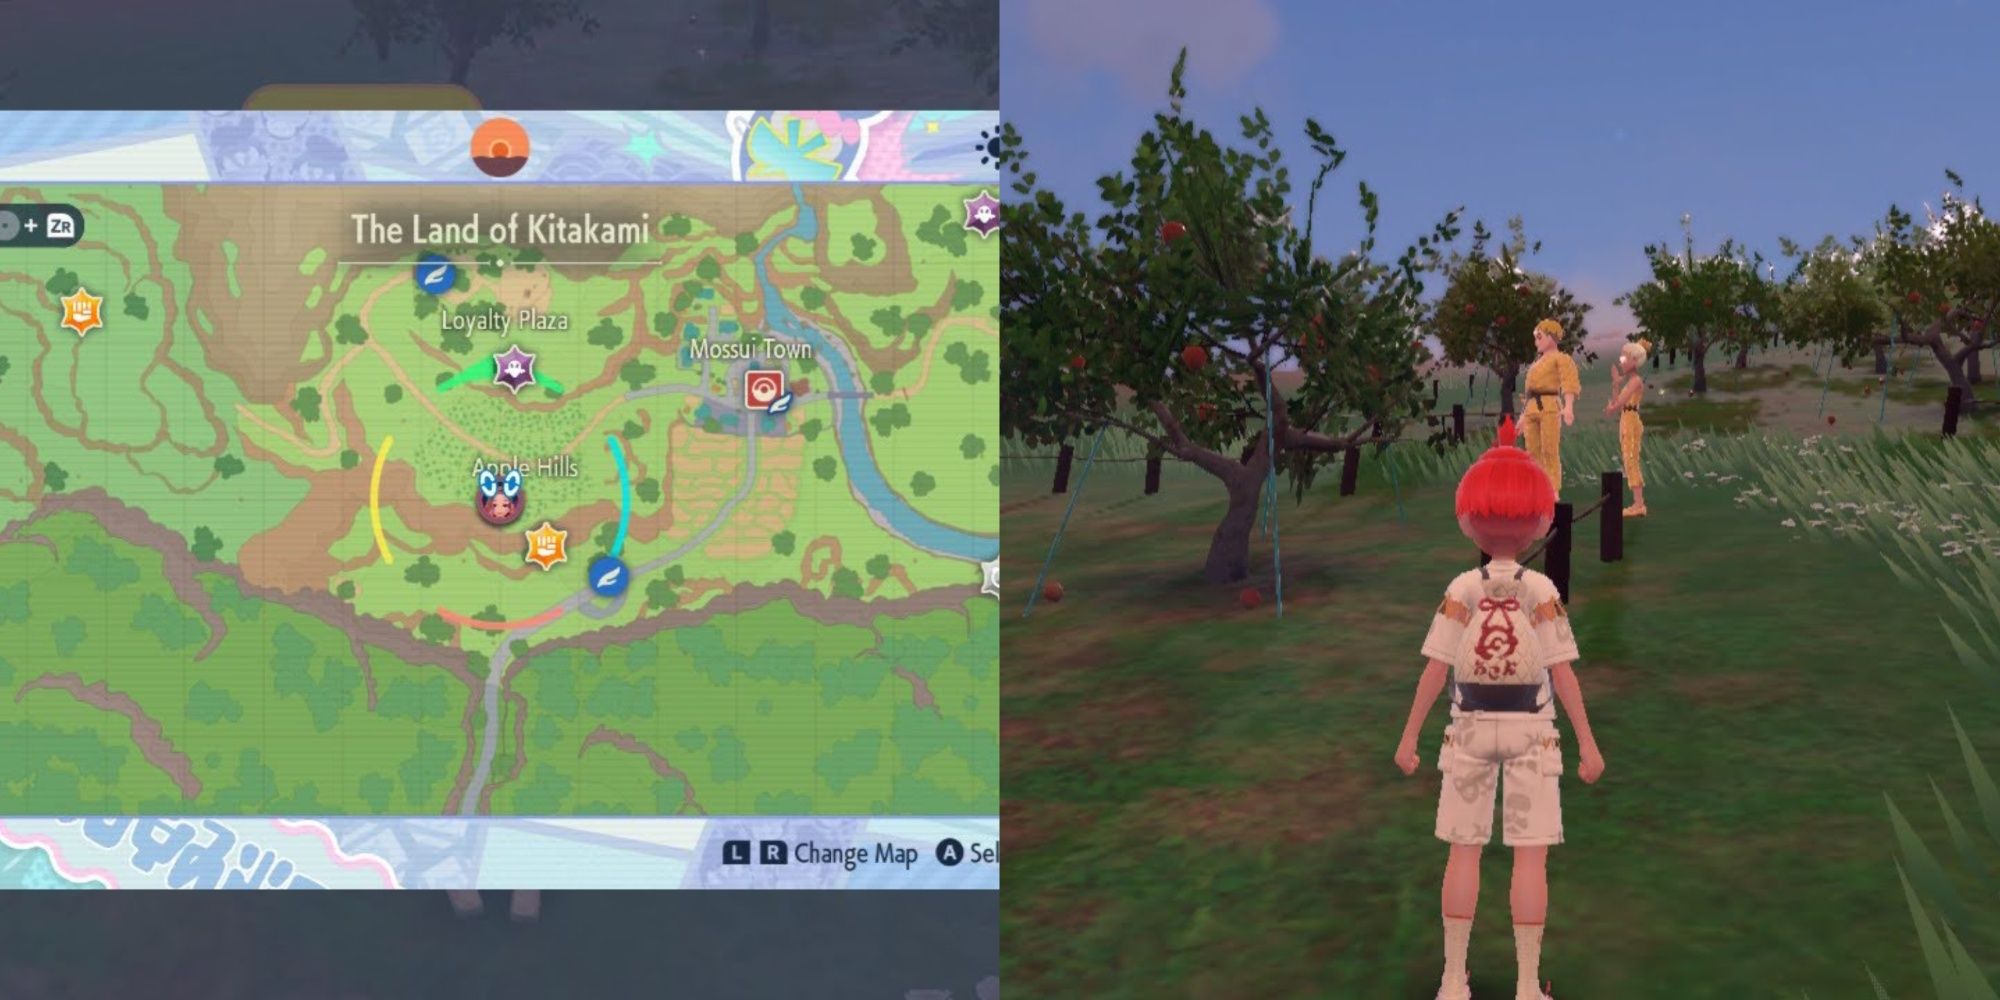 POkemon Scarlet Violet Glitterati Orchard Location showing the in-game map and player besides Billy and O'Nare